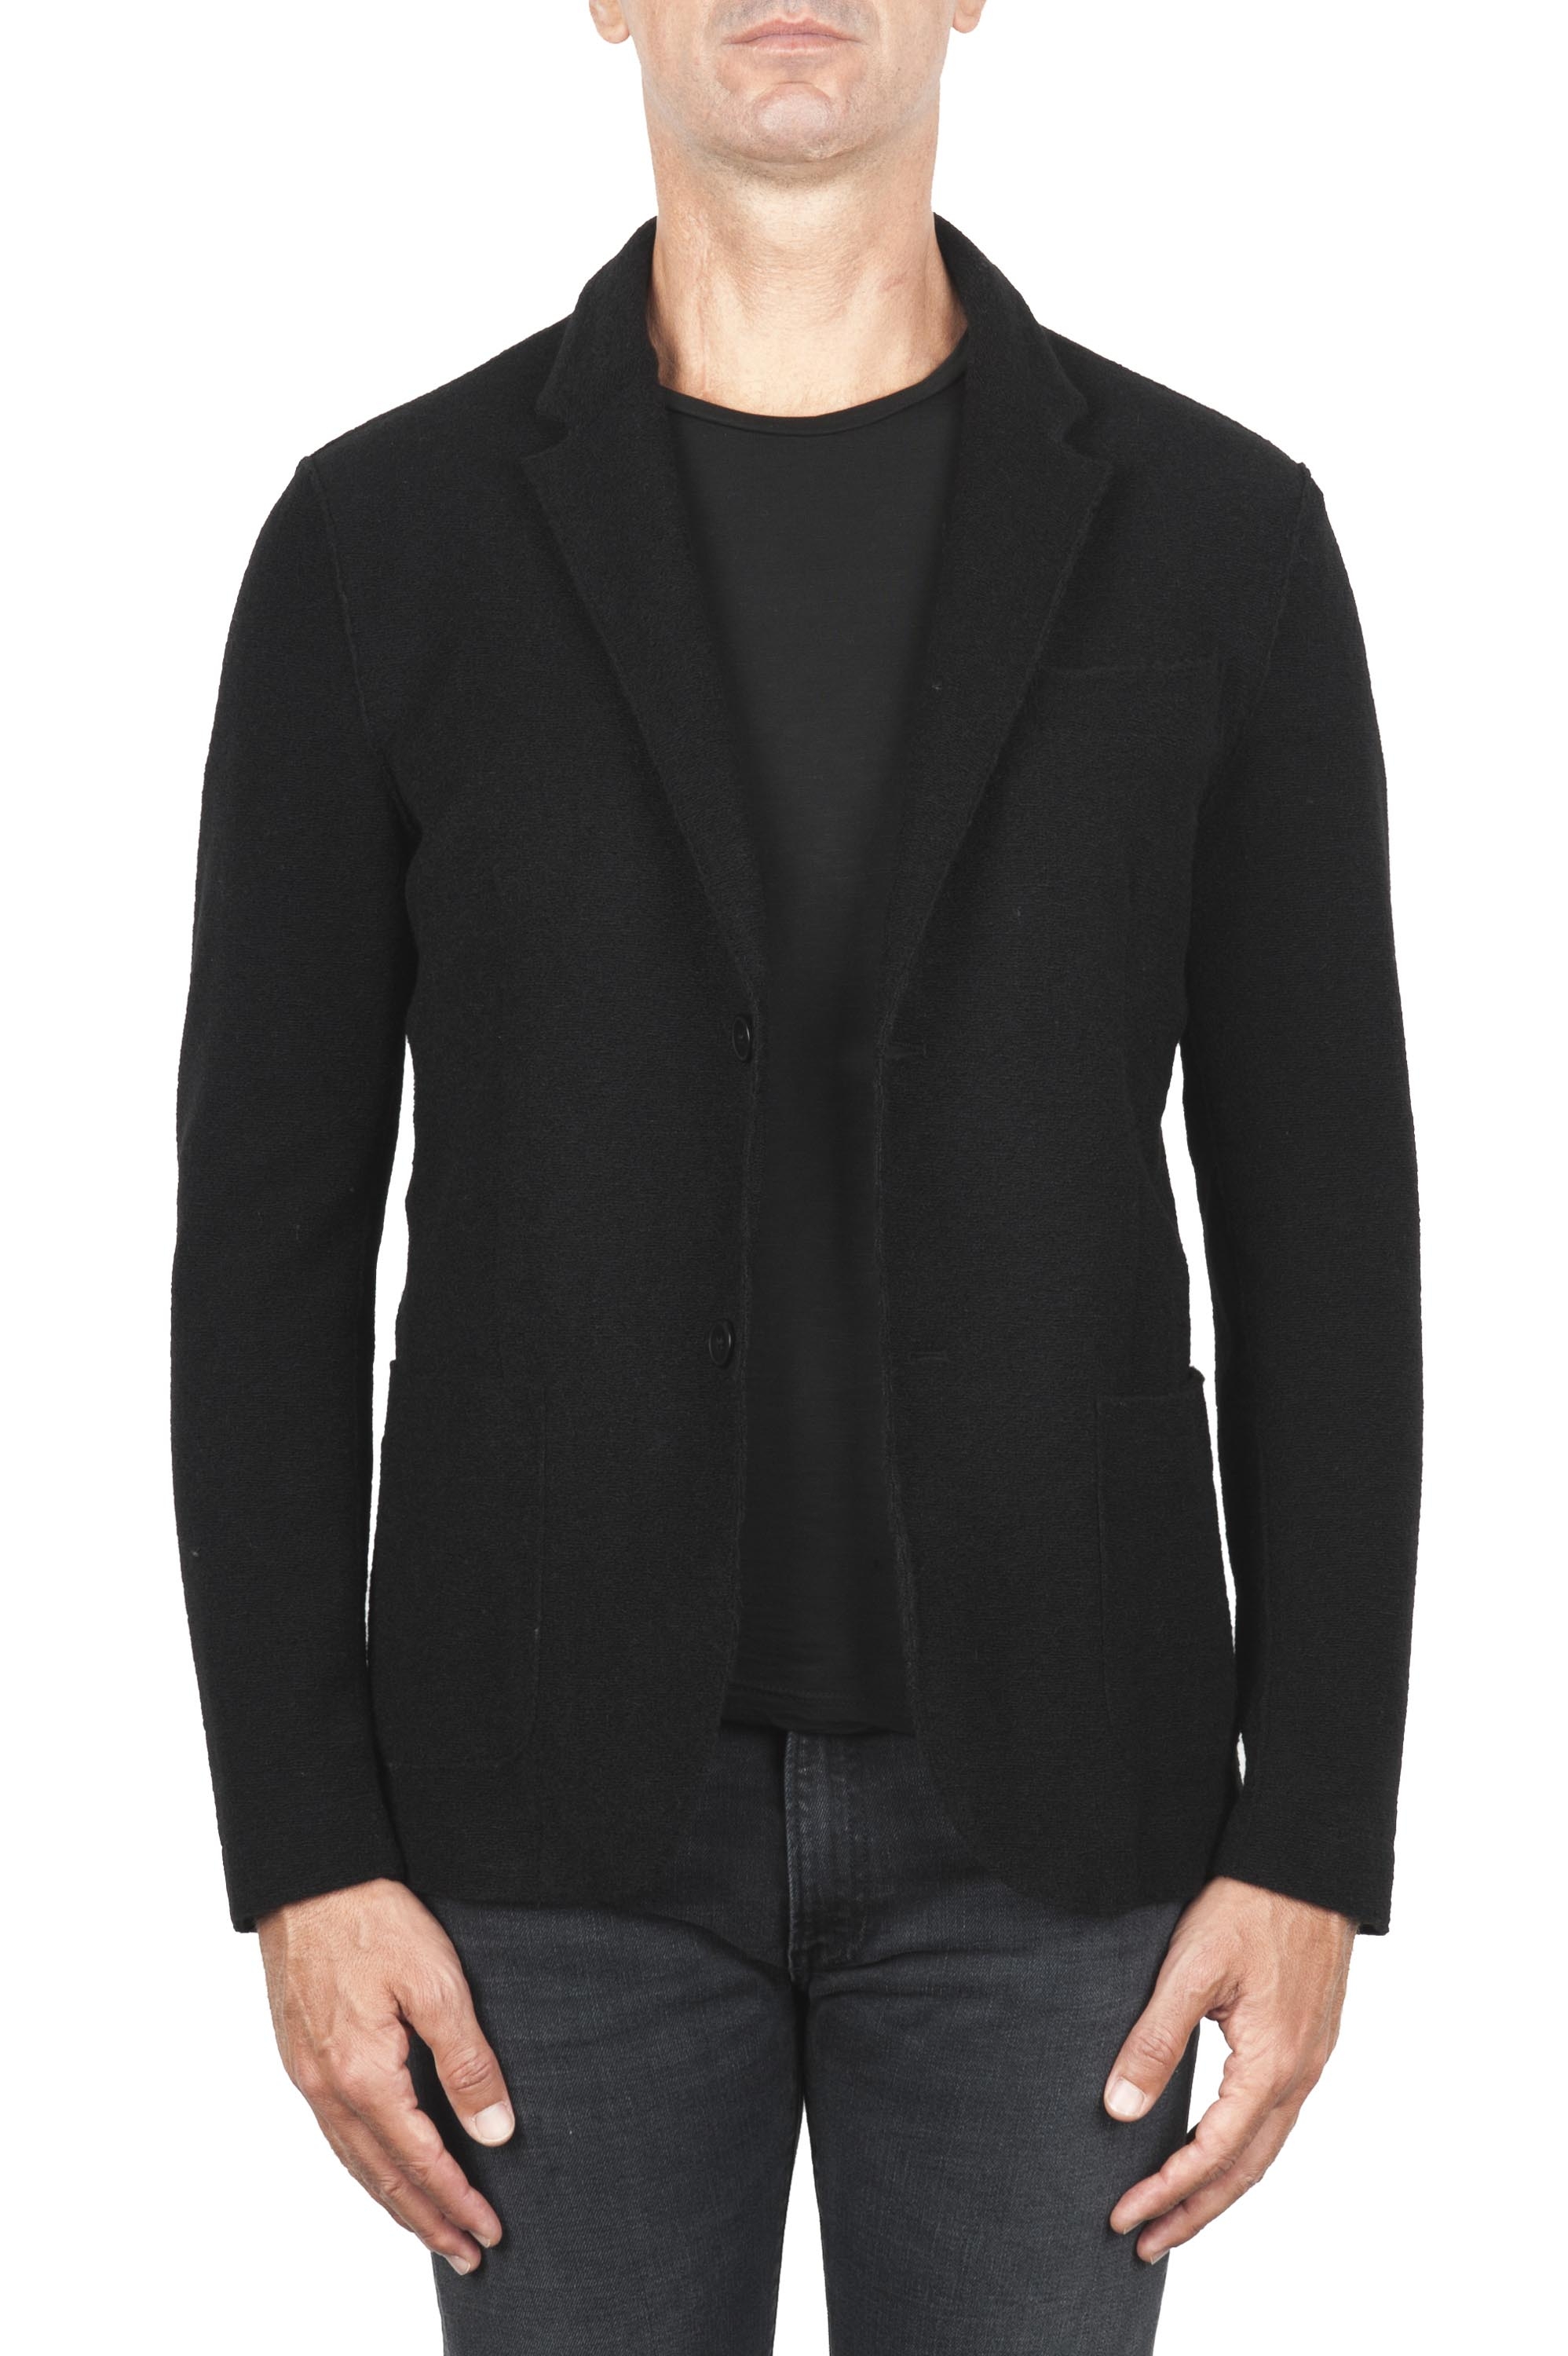 SBU 03098_2020AW Black wool blend sport jacket unconstructed and unlined 01